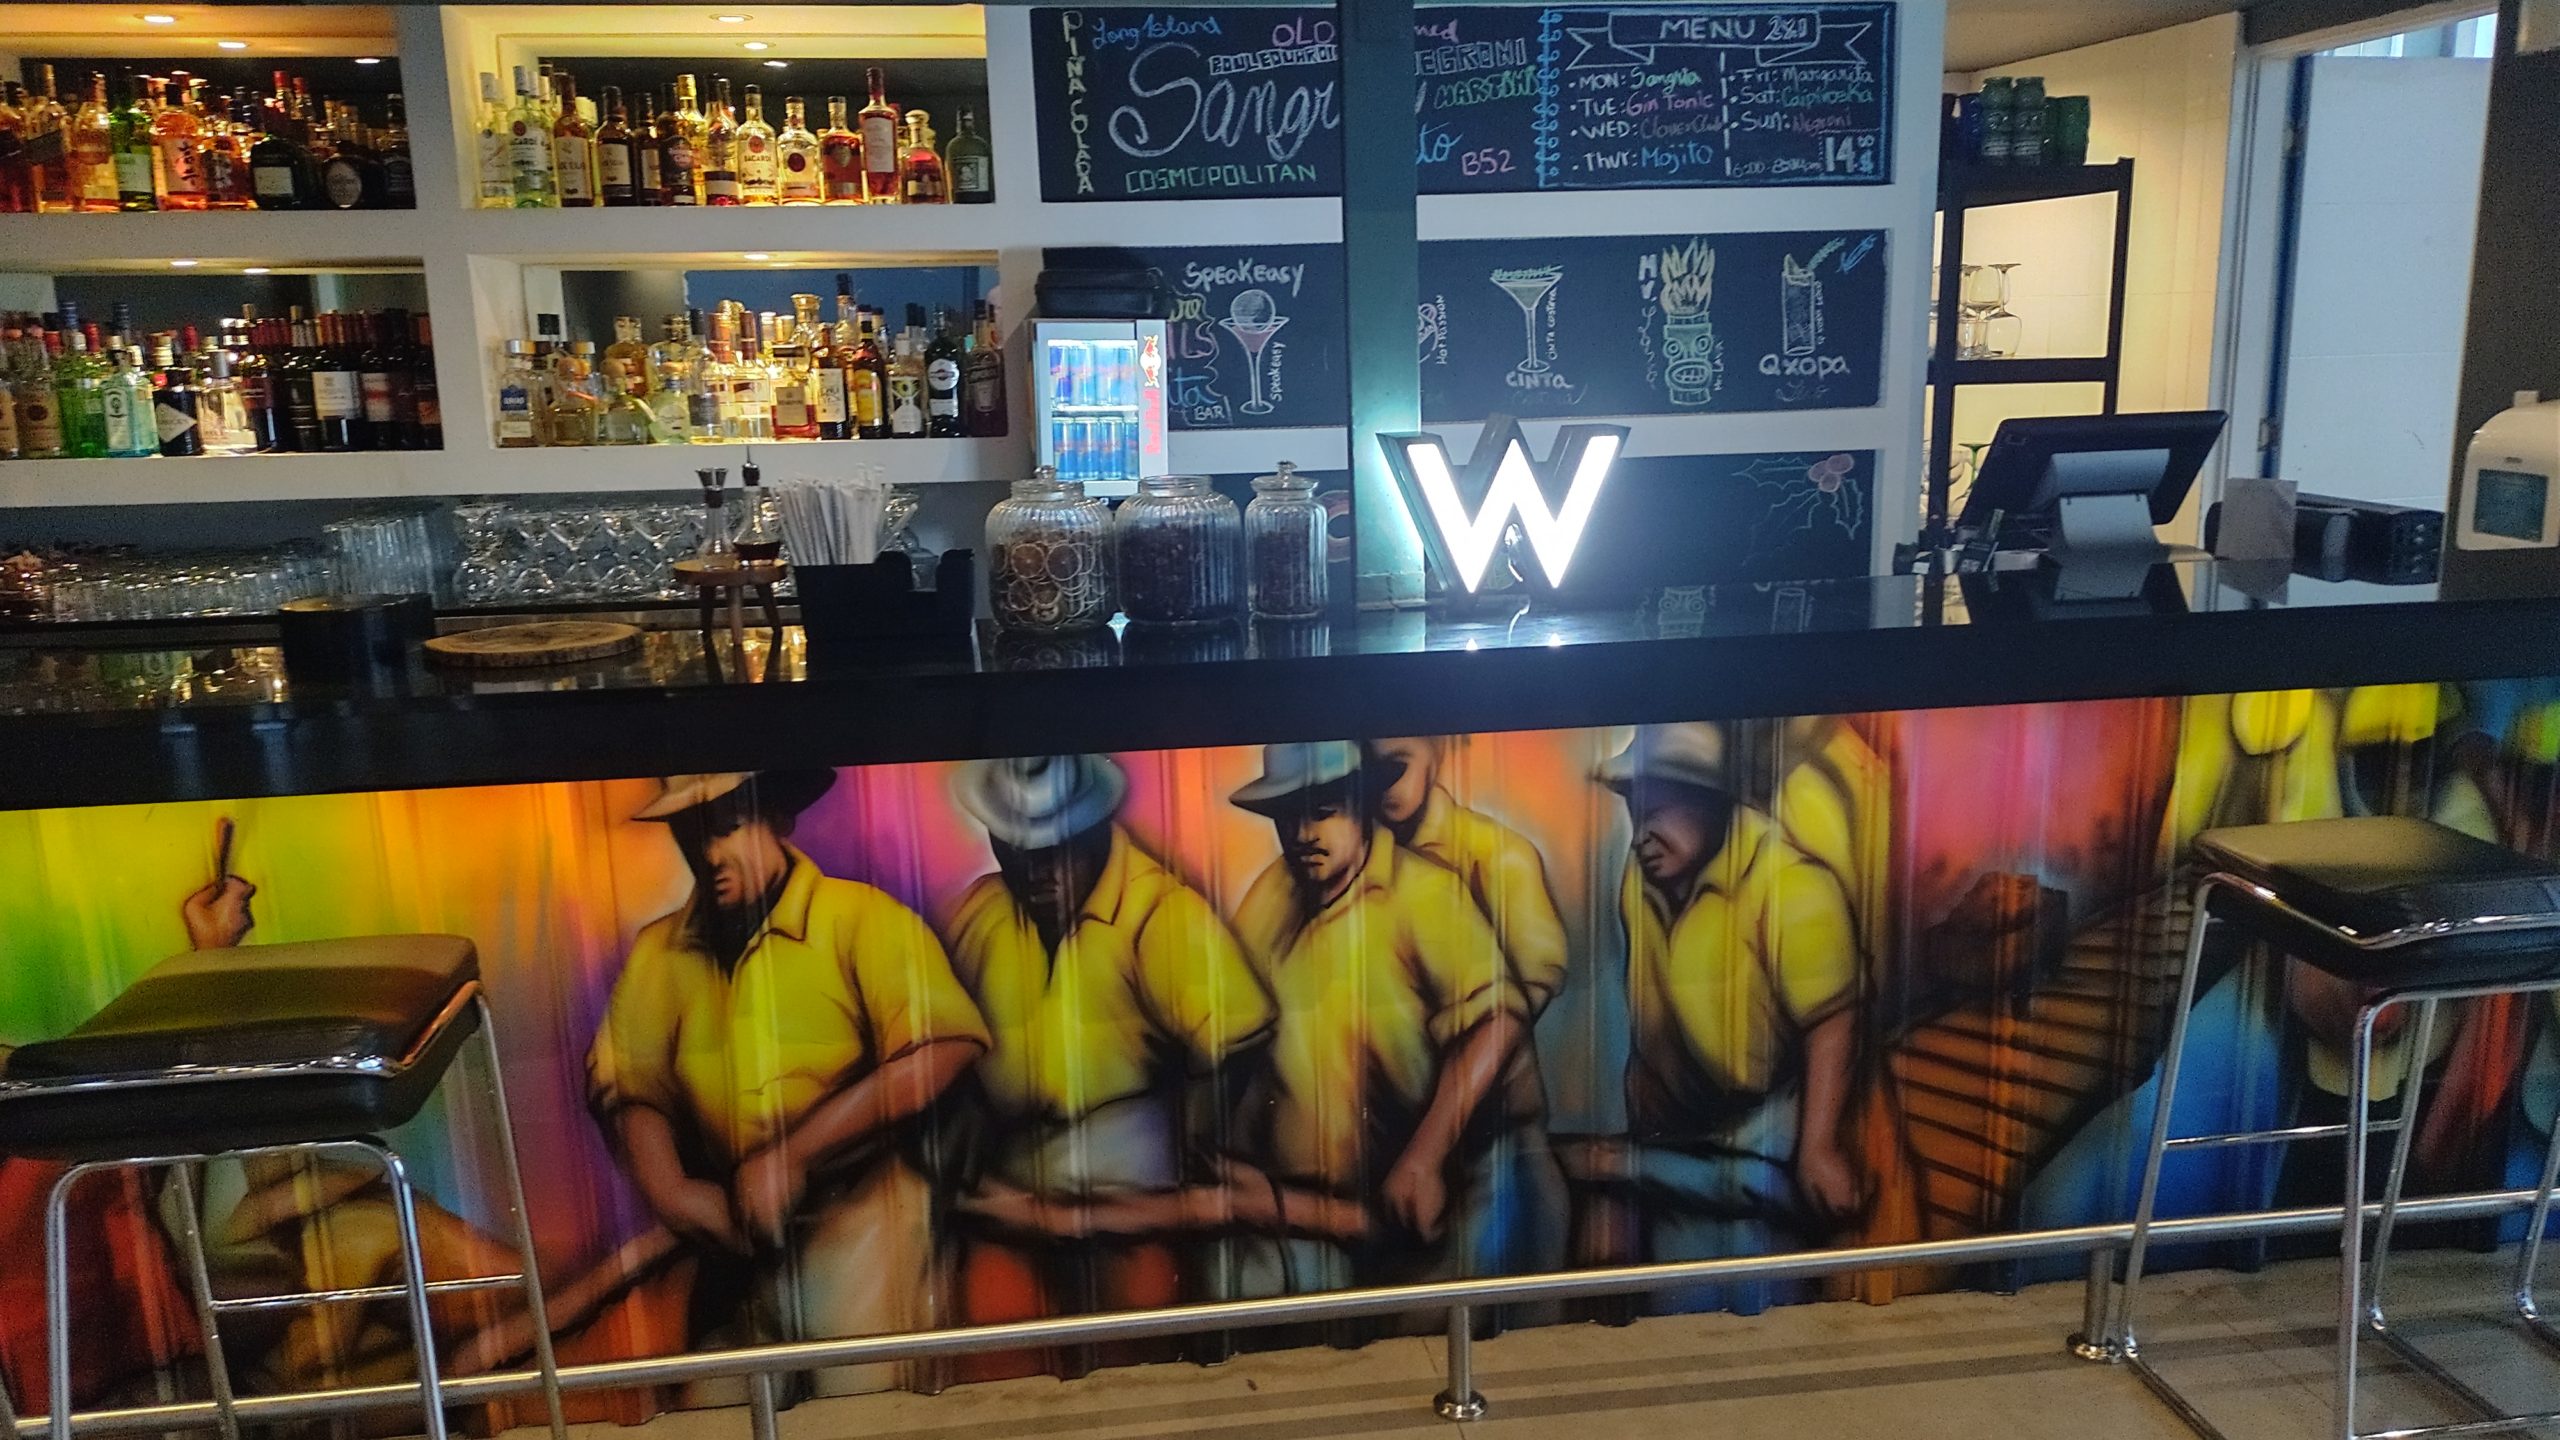 a closer picture of the art work on the bar.